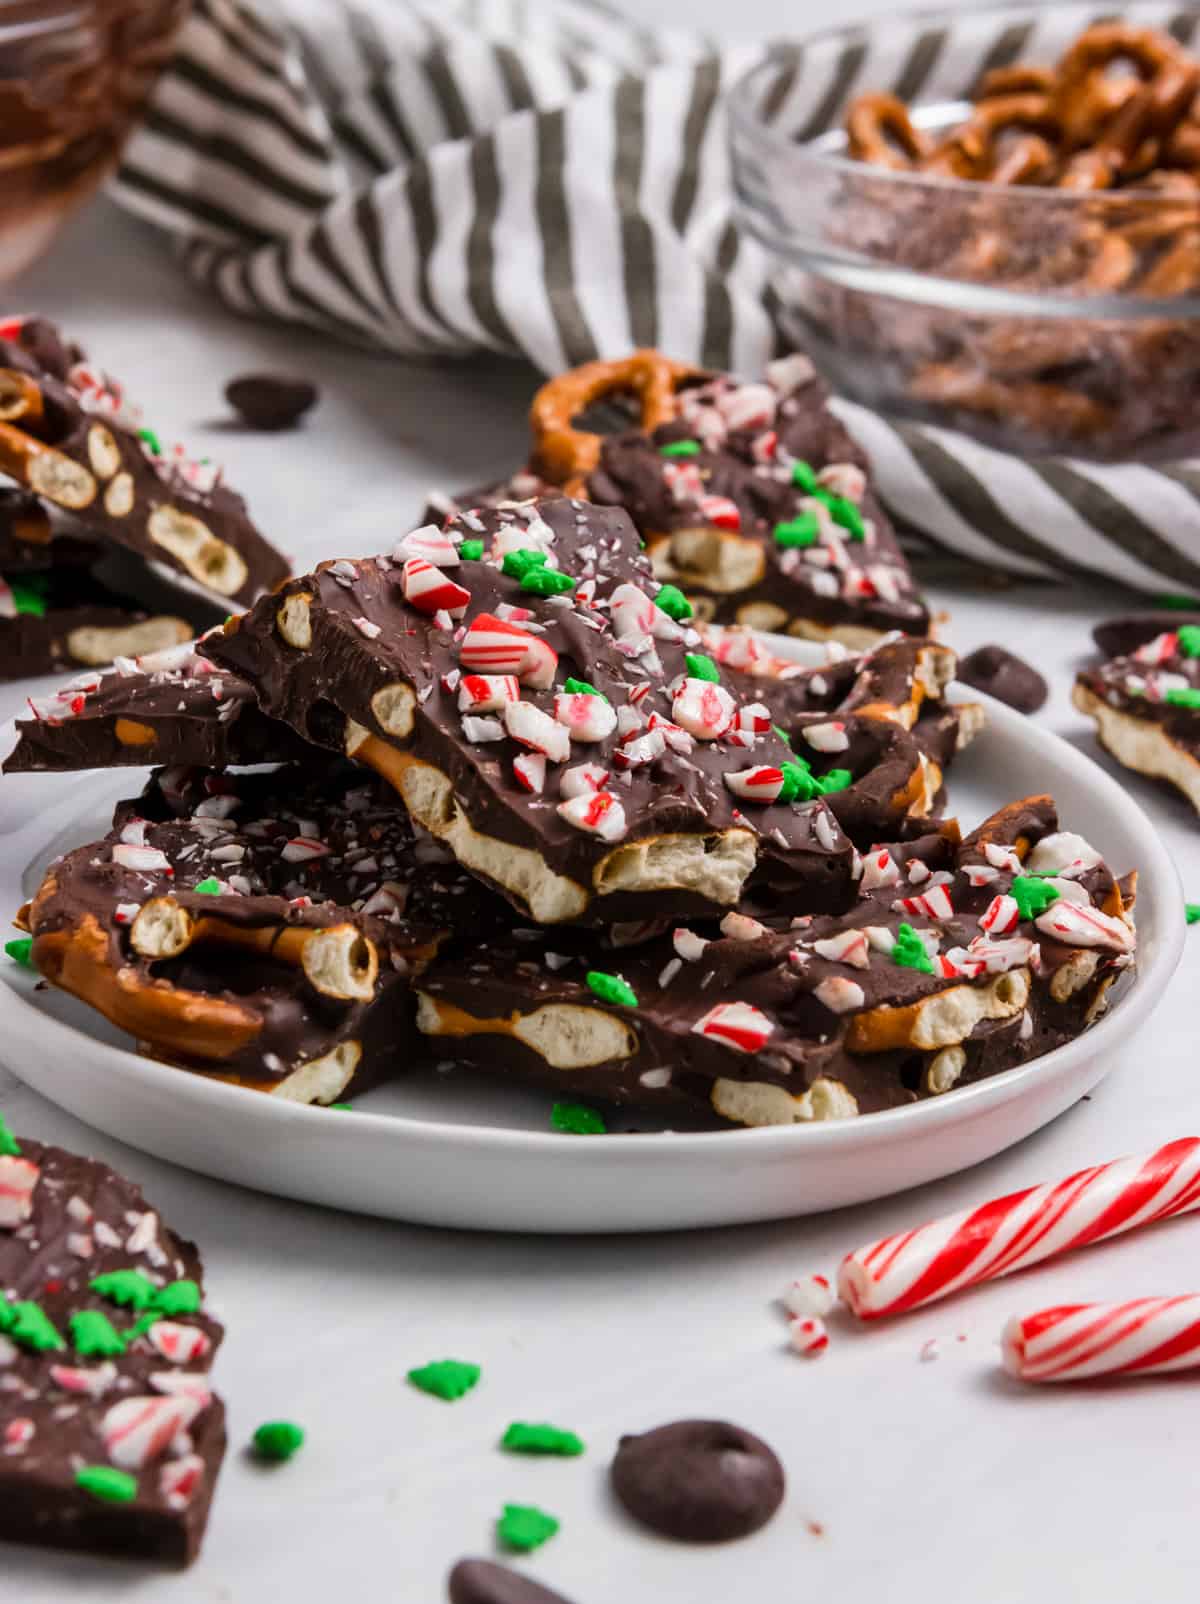 Chocolate Pretzel bark with candy canes and sprinkles on plate.